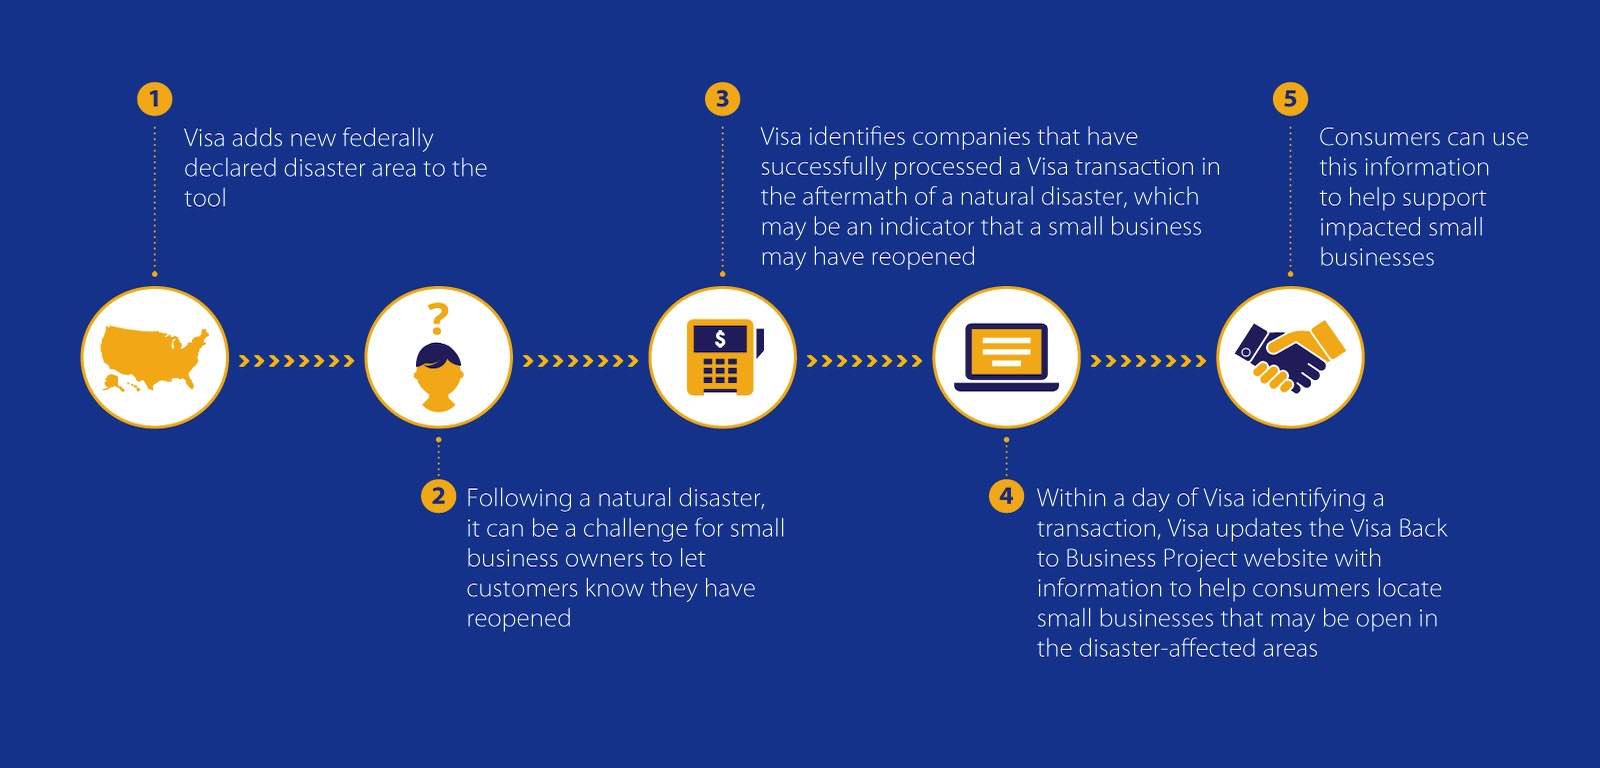 How the Visa Back to Business Project works. Described in detail below.